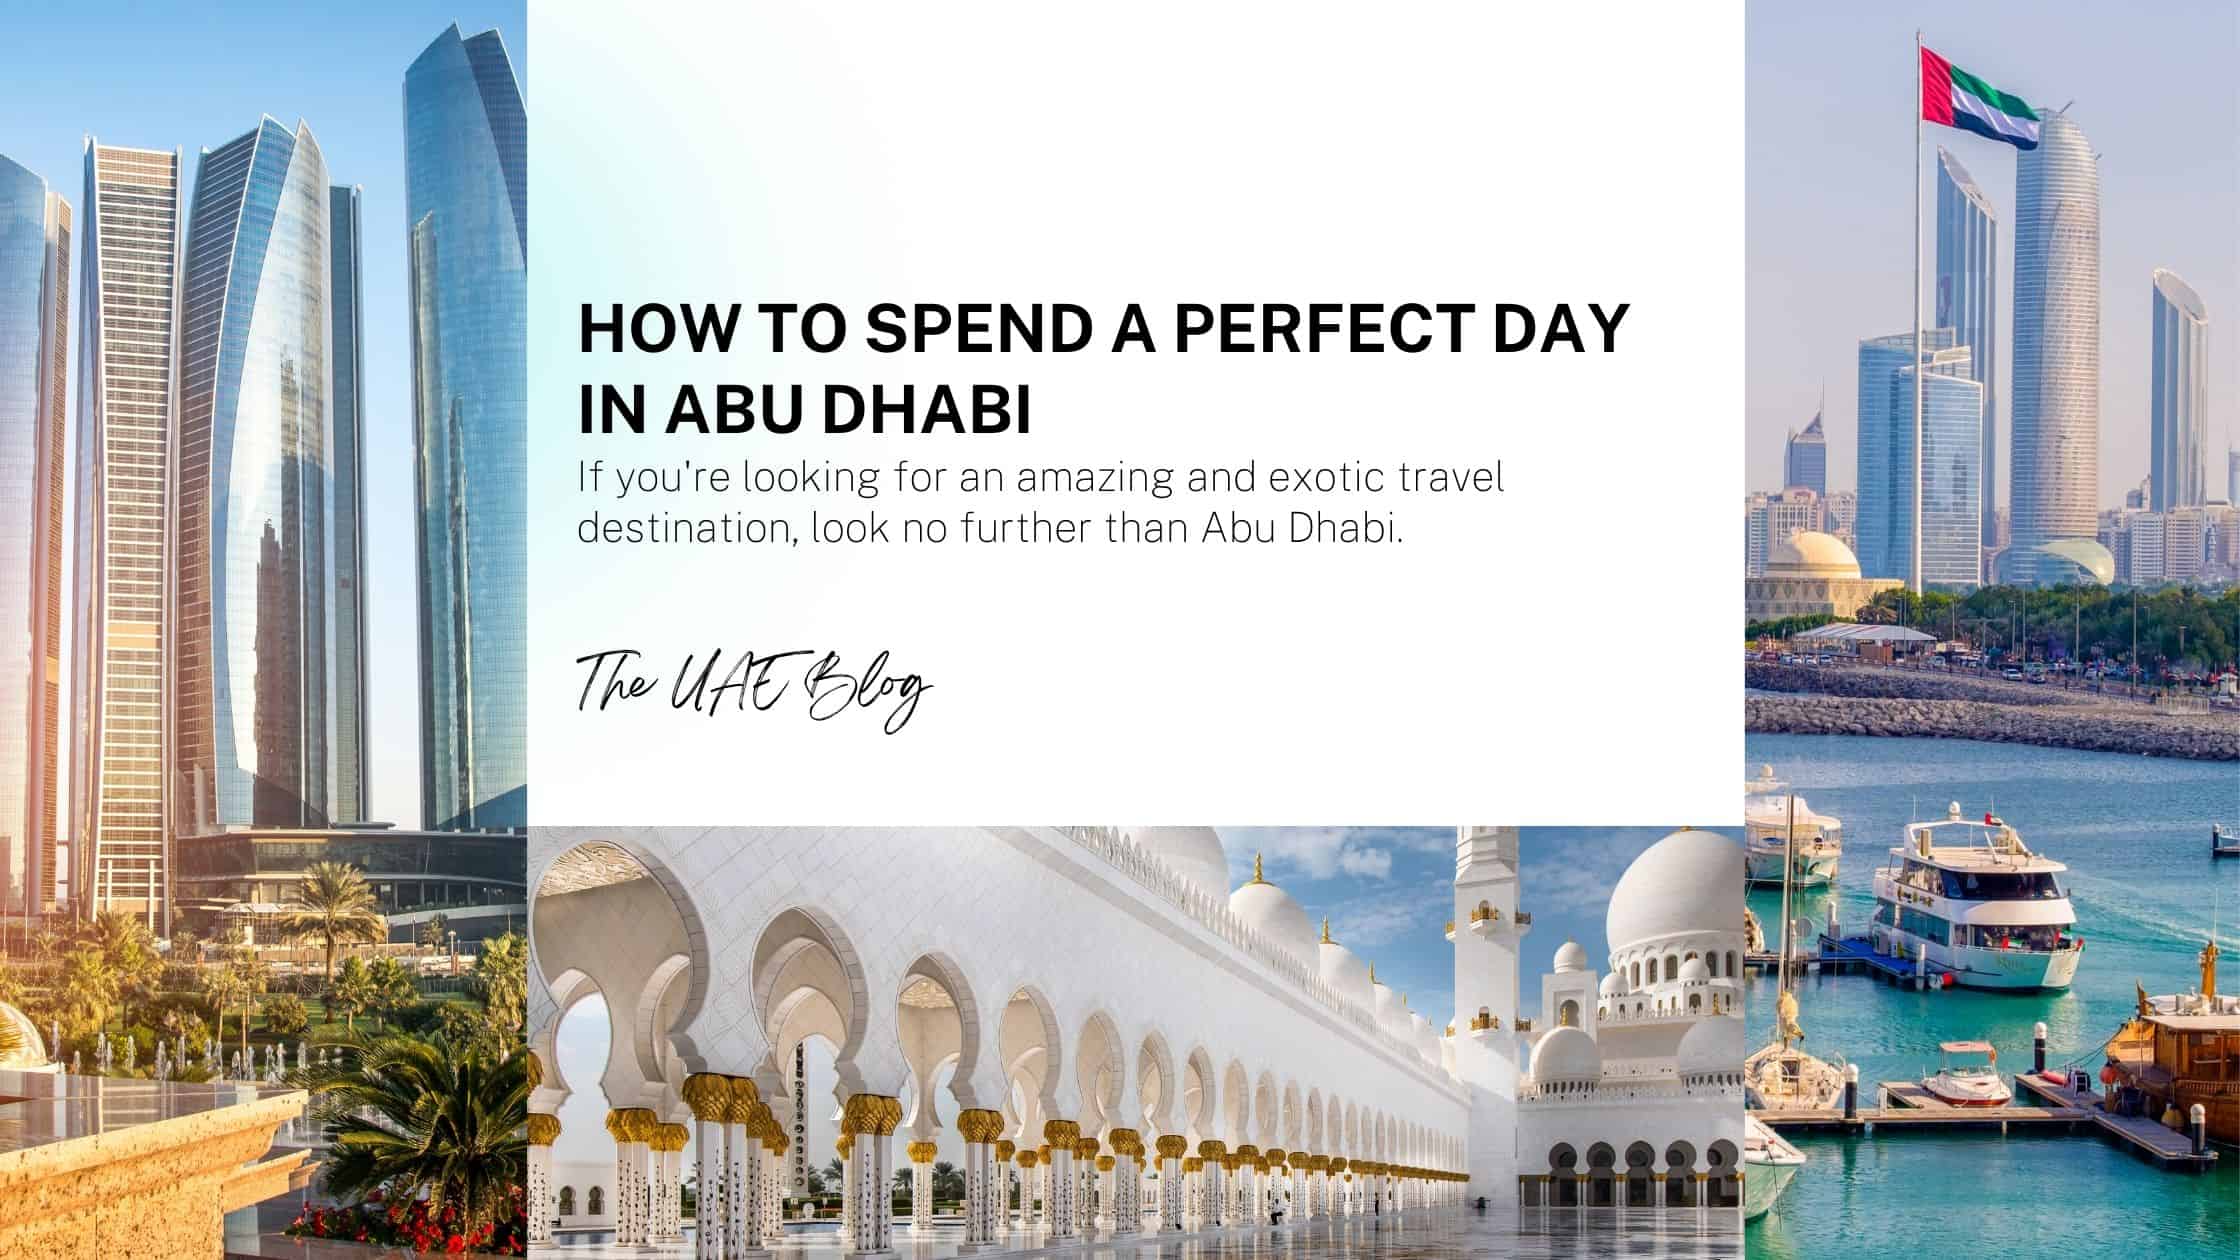 How to spend a perfect day in Abu Dhabi